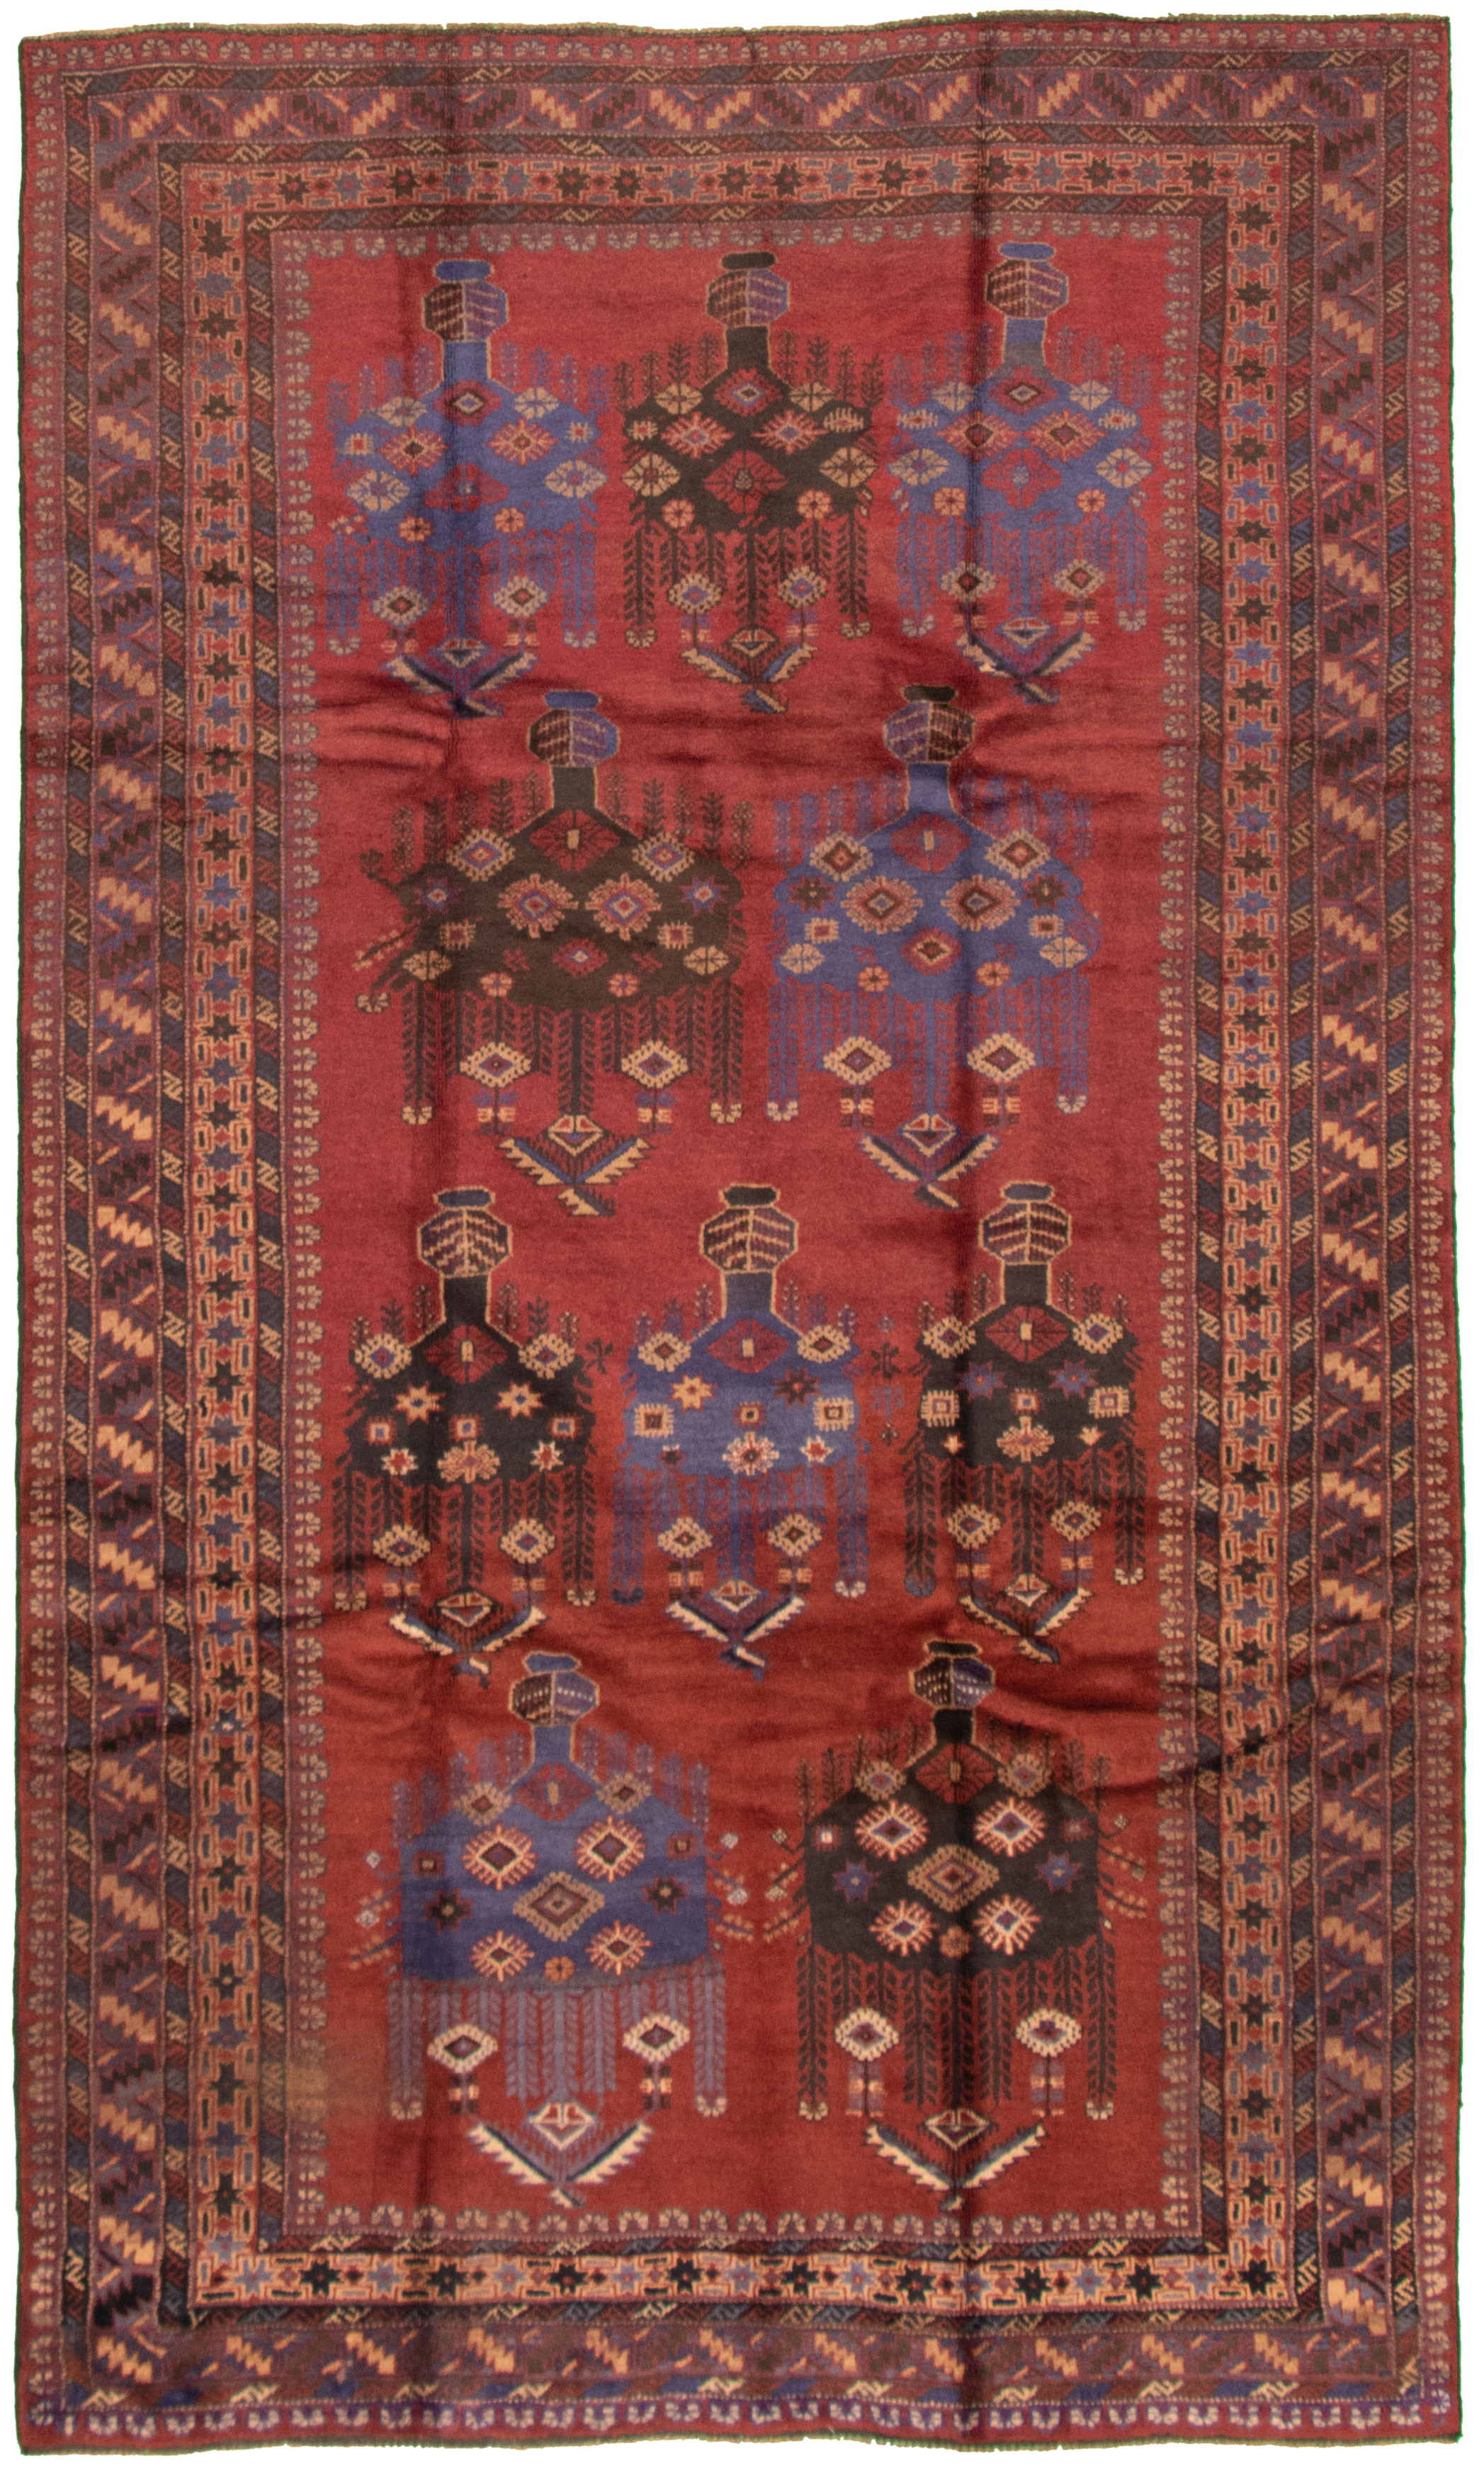 Hand-knotted Rizbaft Dark Red Wool Rug 5'6" x 9'6" Size: 5'6" x 9'6"  